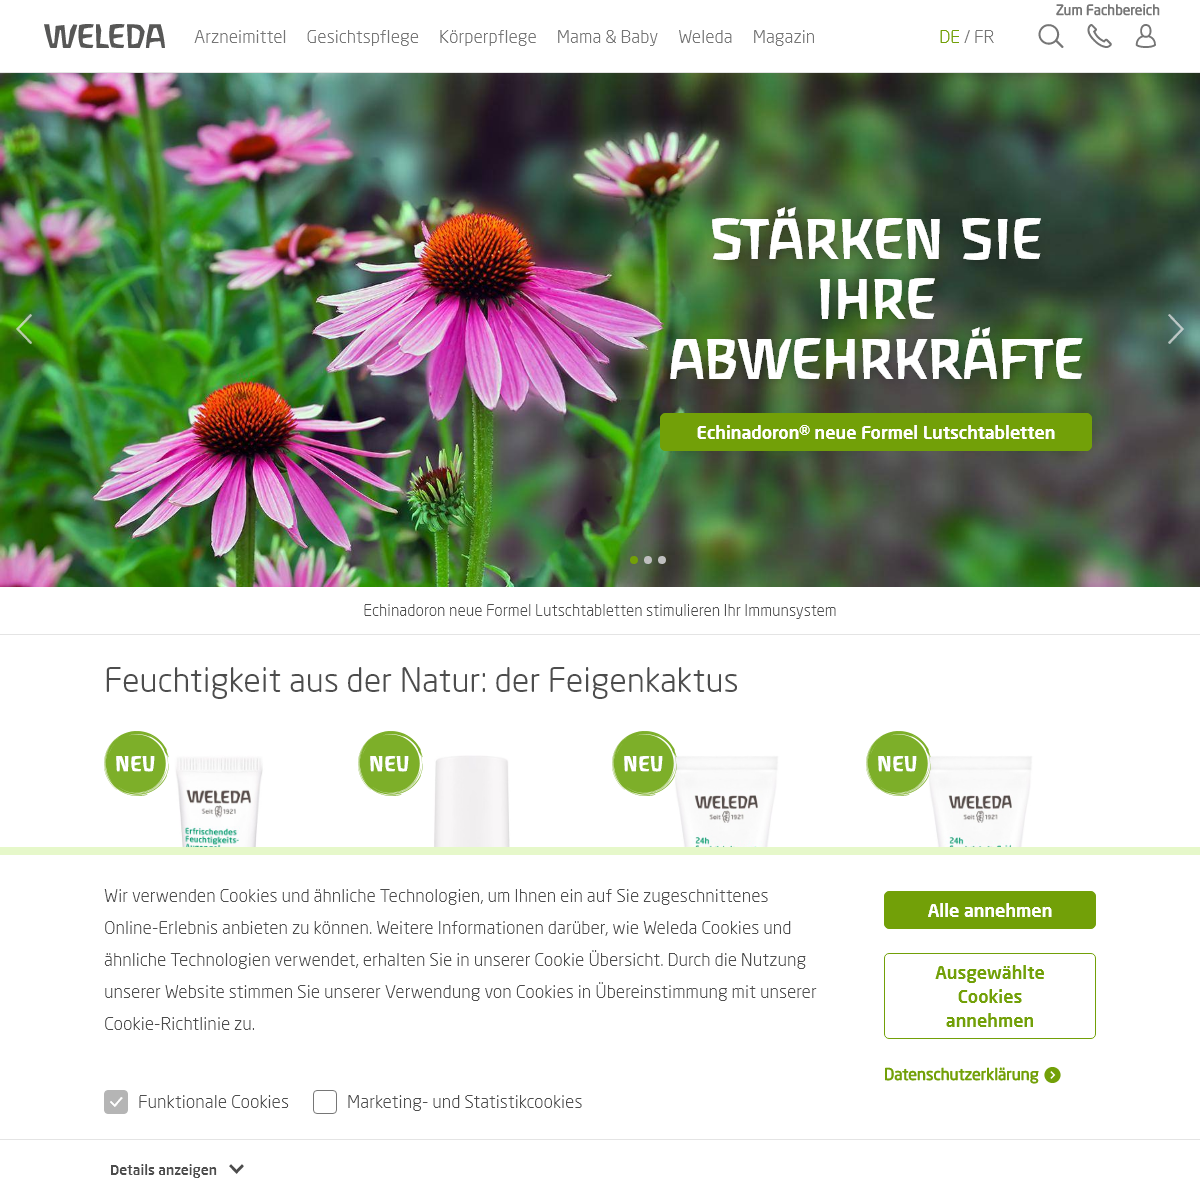 A complete backup of weleda.ch